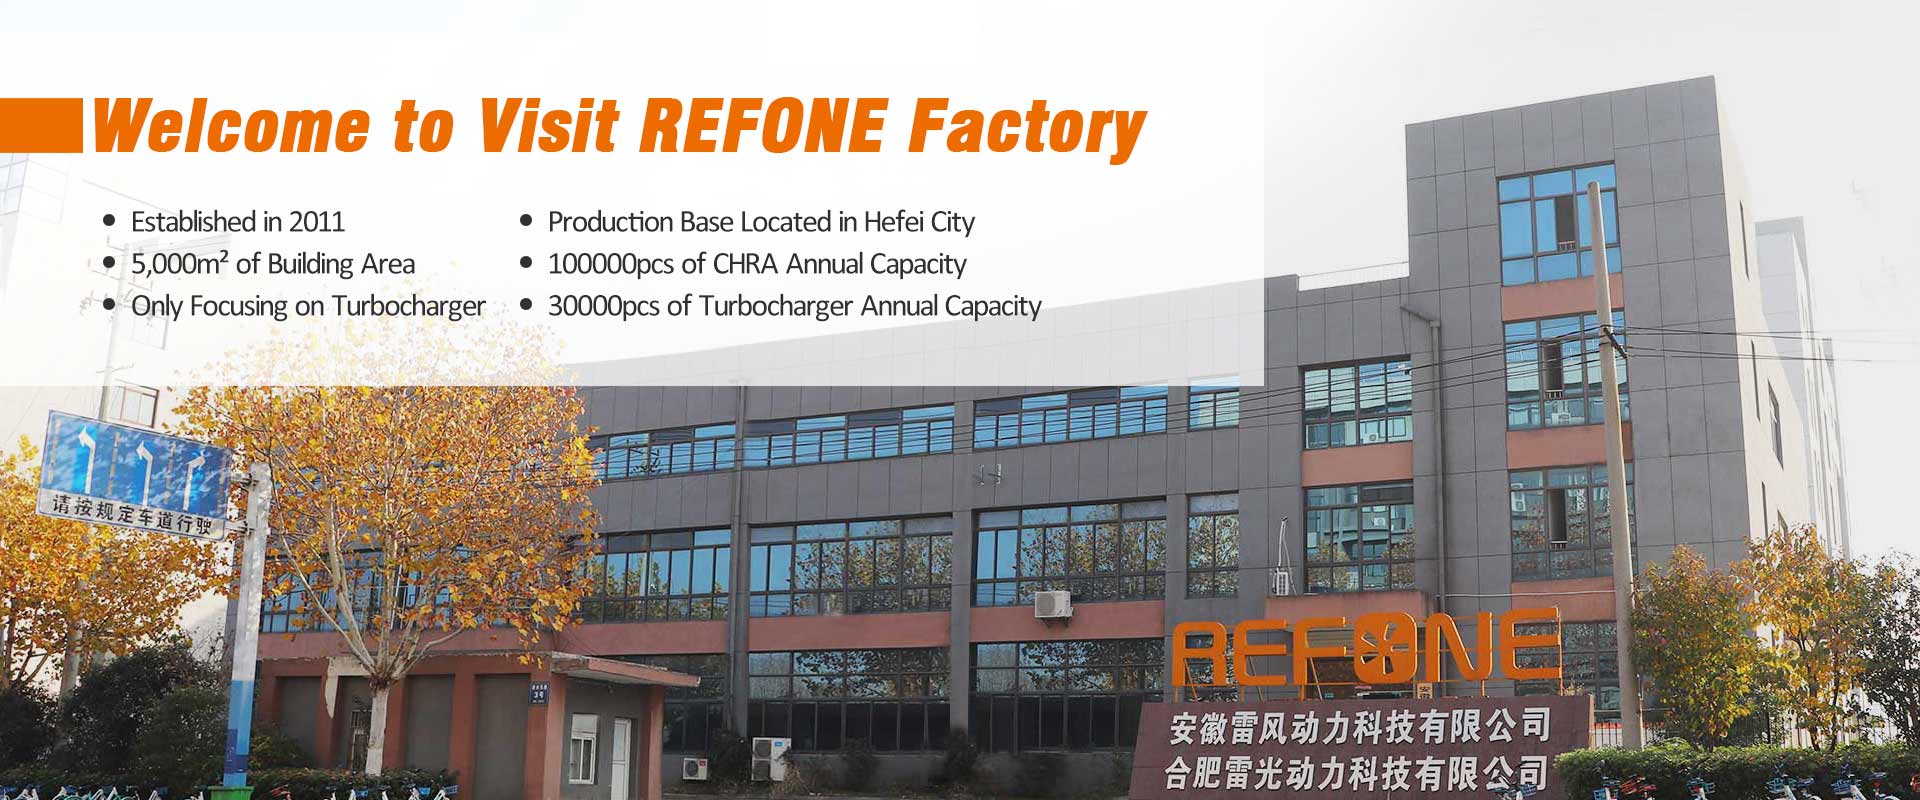 Refone Factory